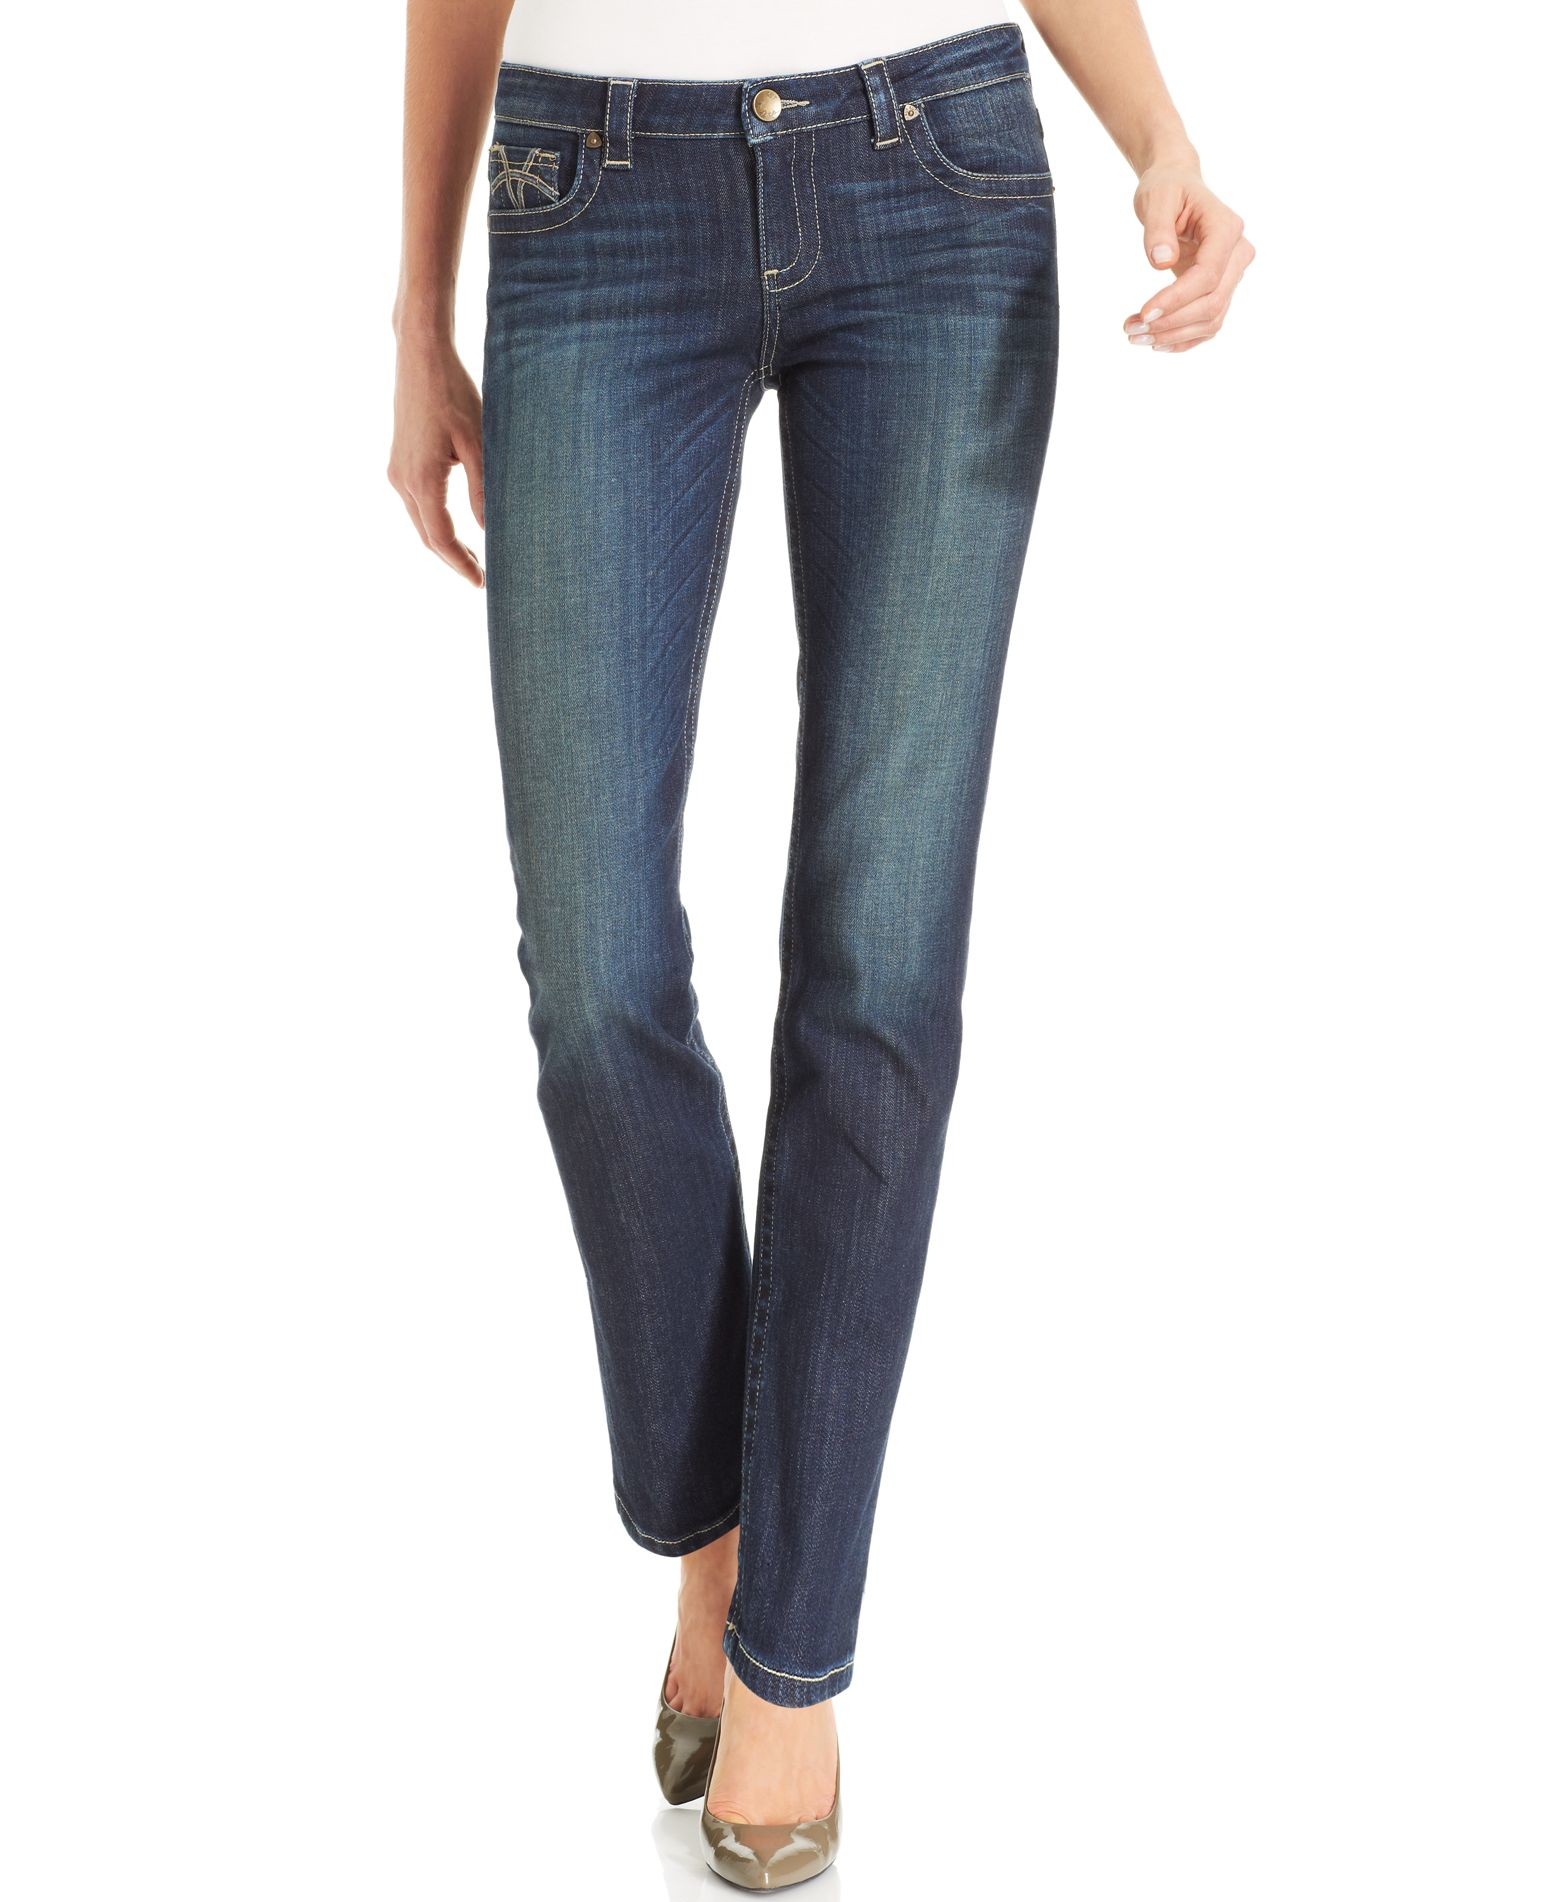 Kut from the kloth Stevie Straight-leg Jeans in Natural | Lyst